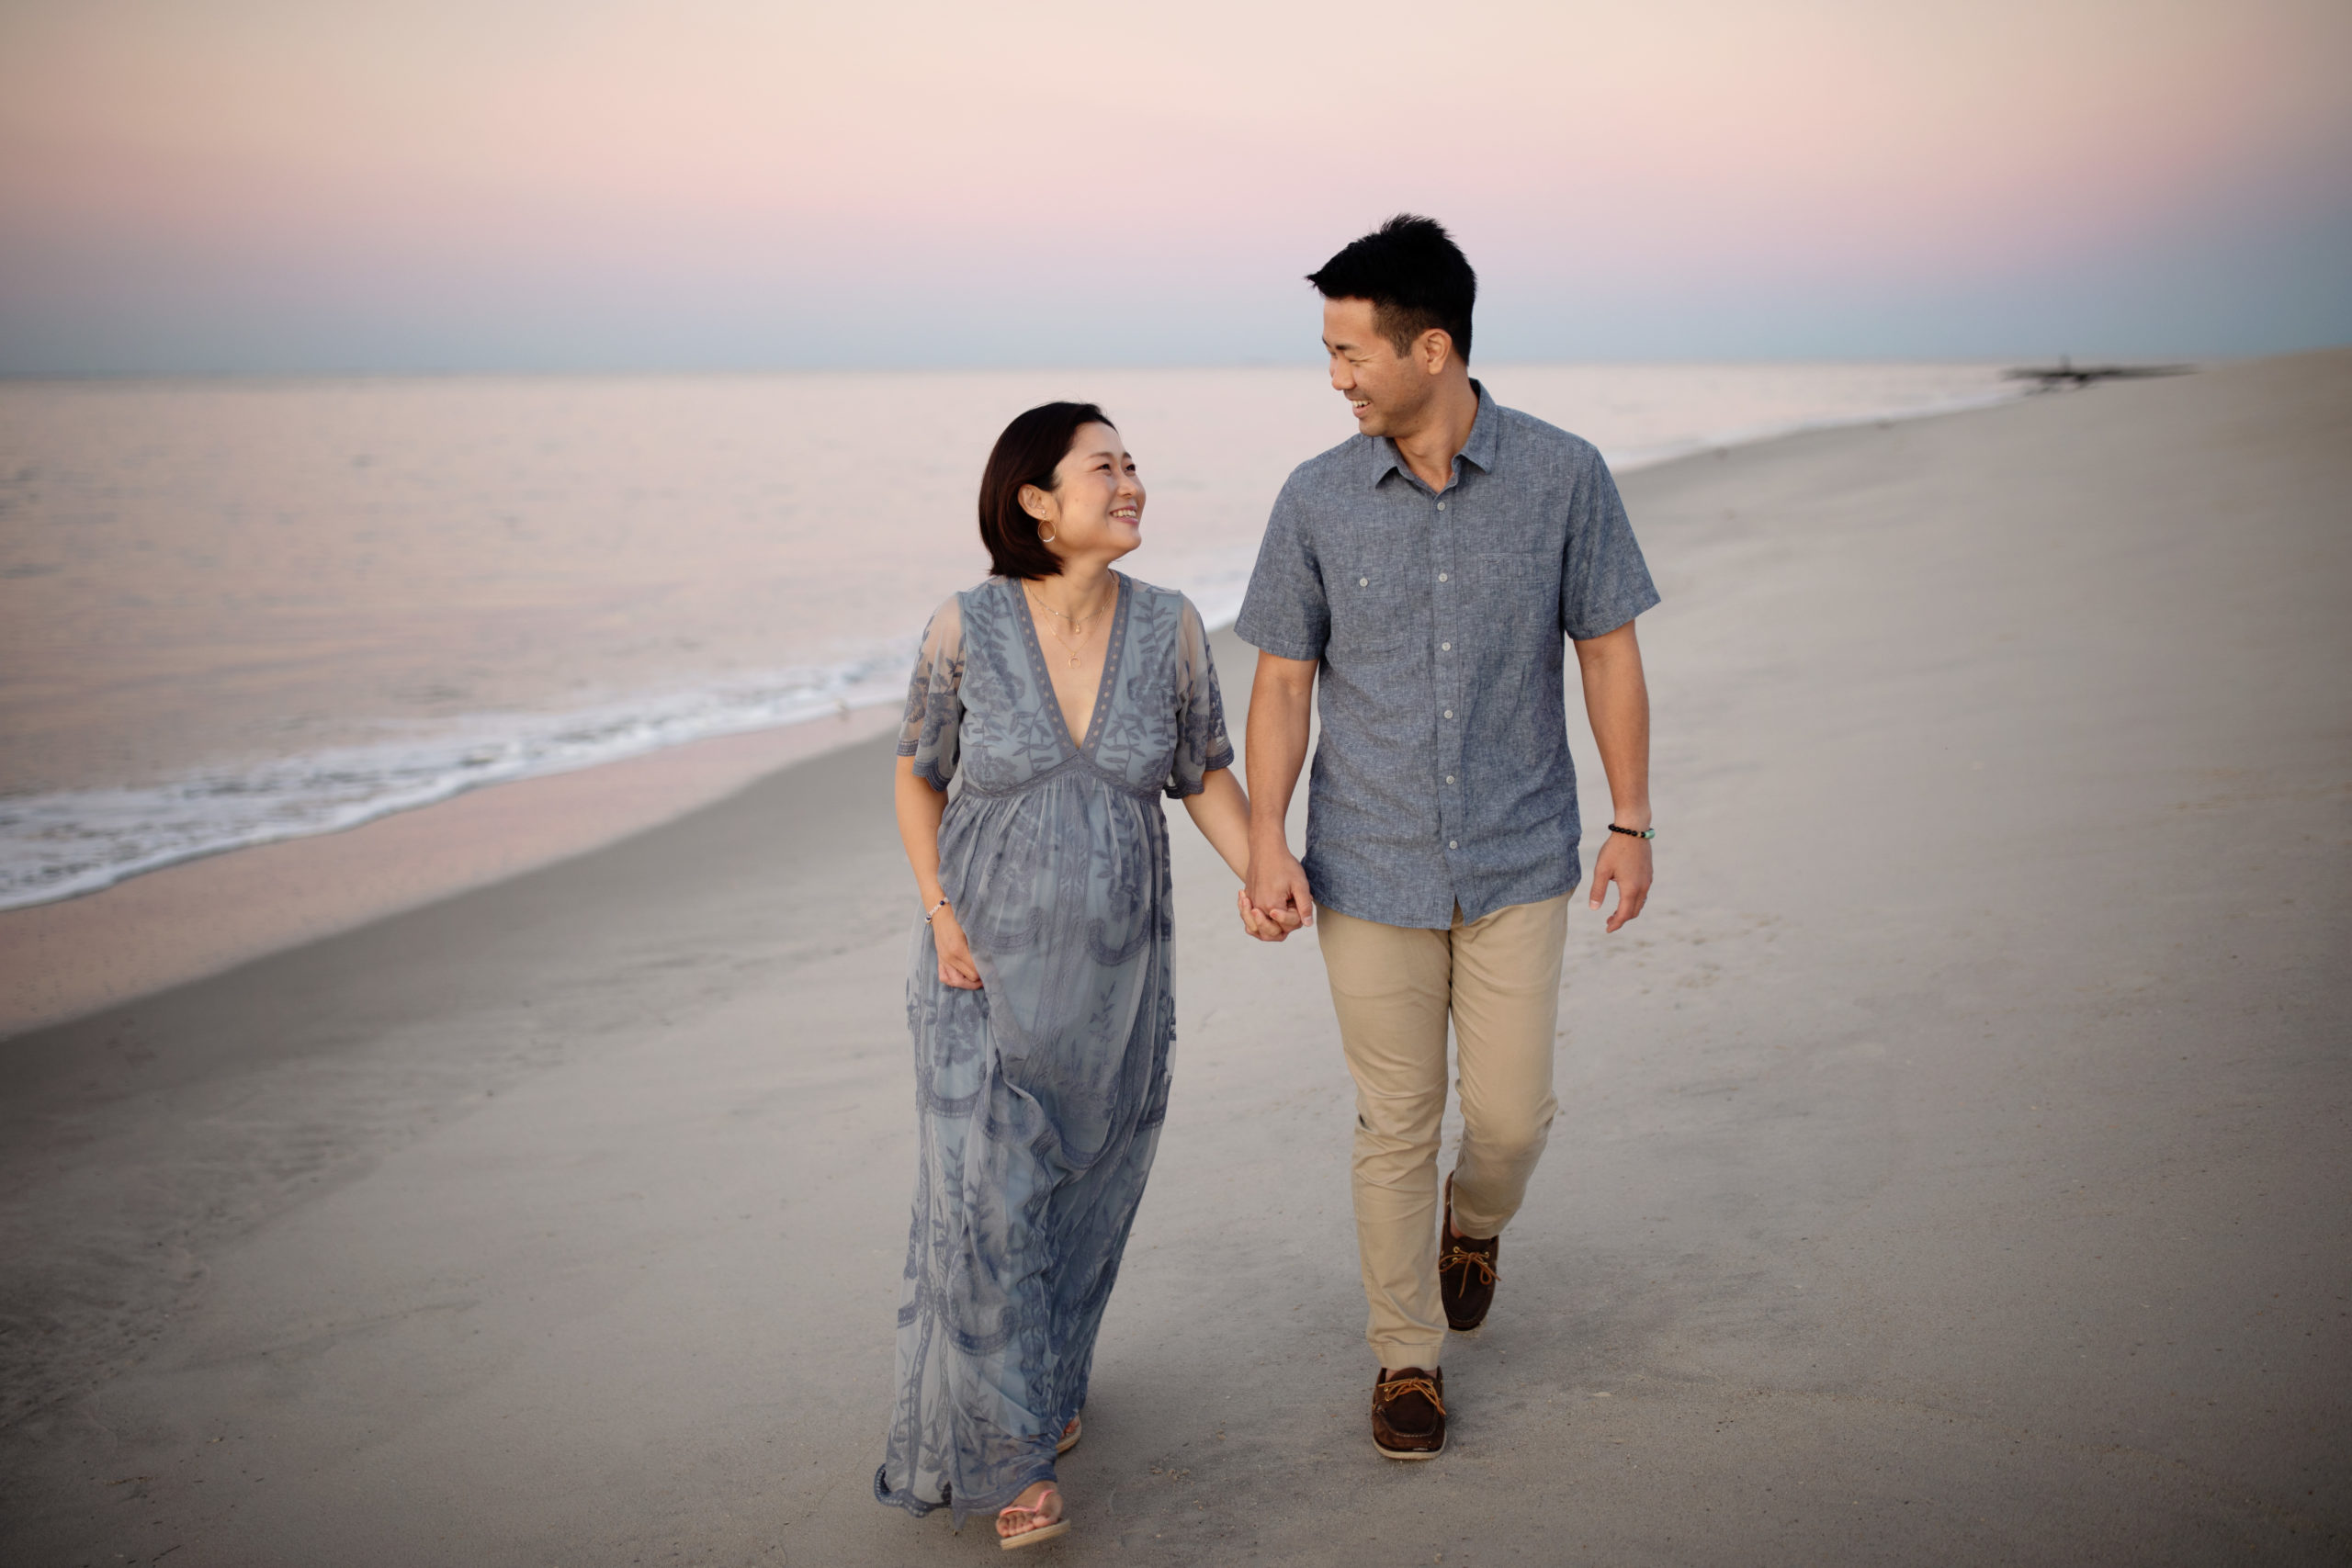 Cape May New Jersey Destination Maternity Portraits-Cape May, New Jersey Wedding and Family Photographer